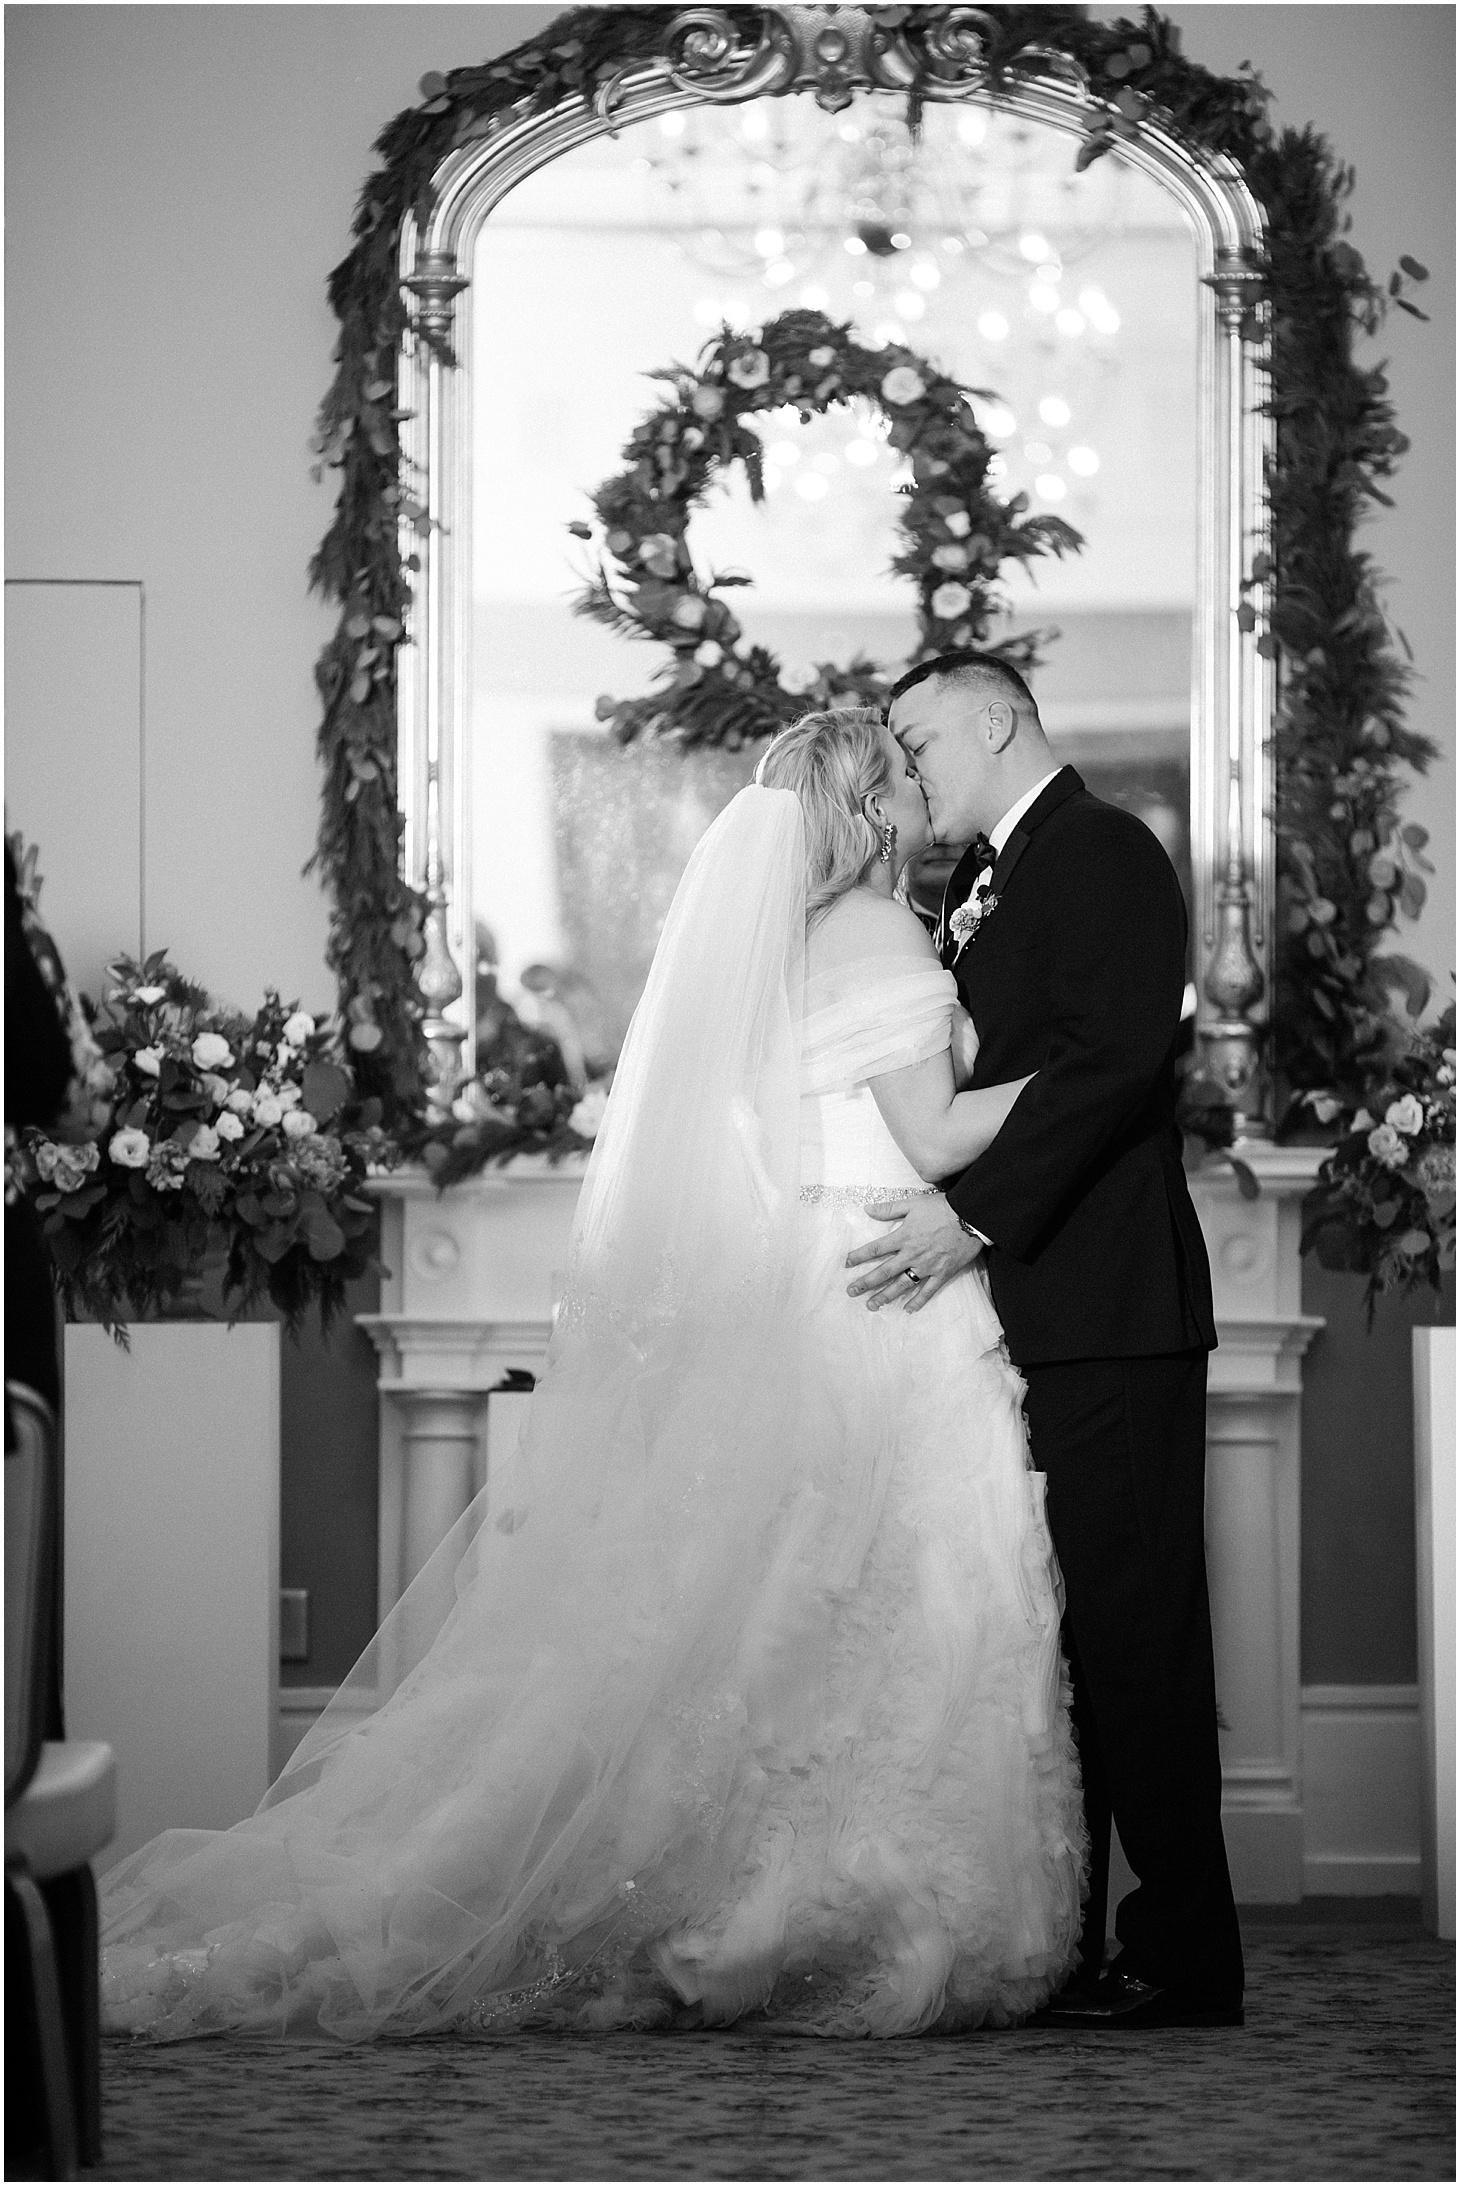 Wedding Ceremony at the Army and Navy Club | Luxe Winter Wedding in Washington, DC | Sarah Bradshaw Photography | Washington DC Wedding Photographer